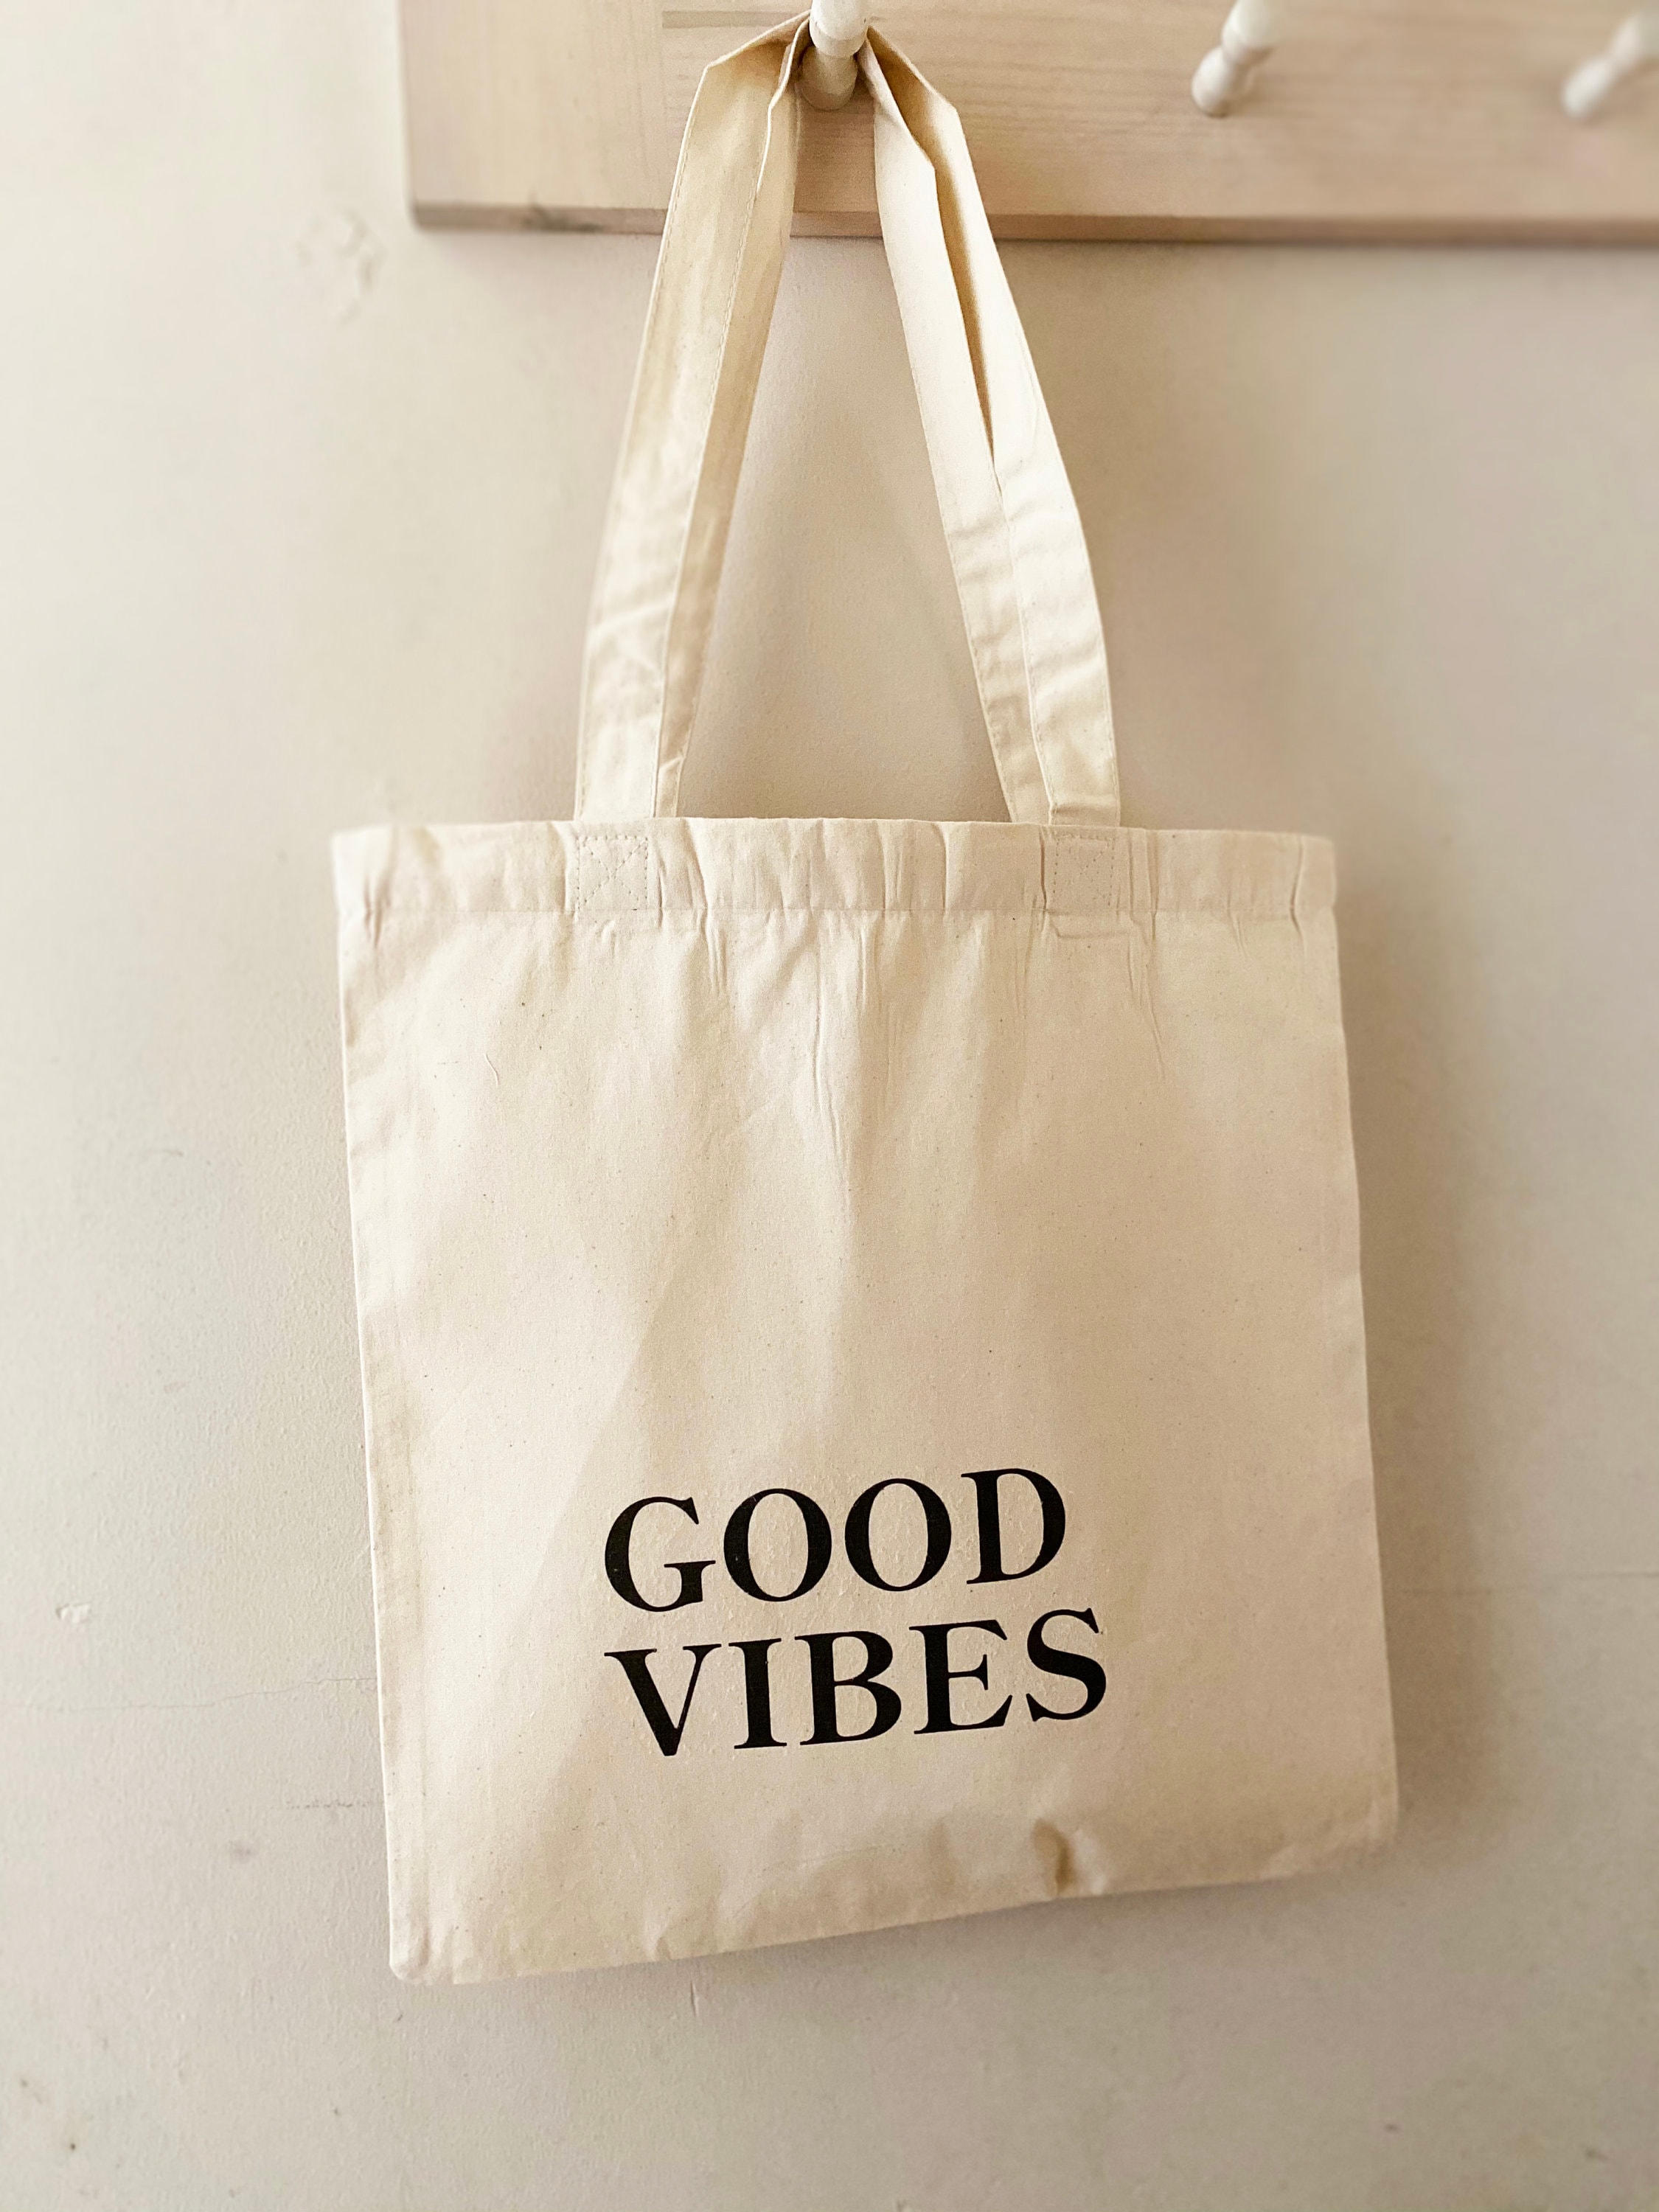 Good Vibes Tote Bag Raise your vibration Law of Attraction | Etsy